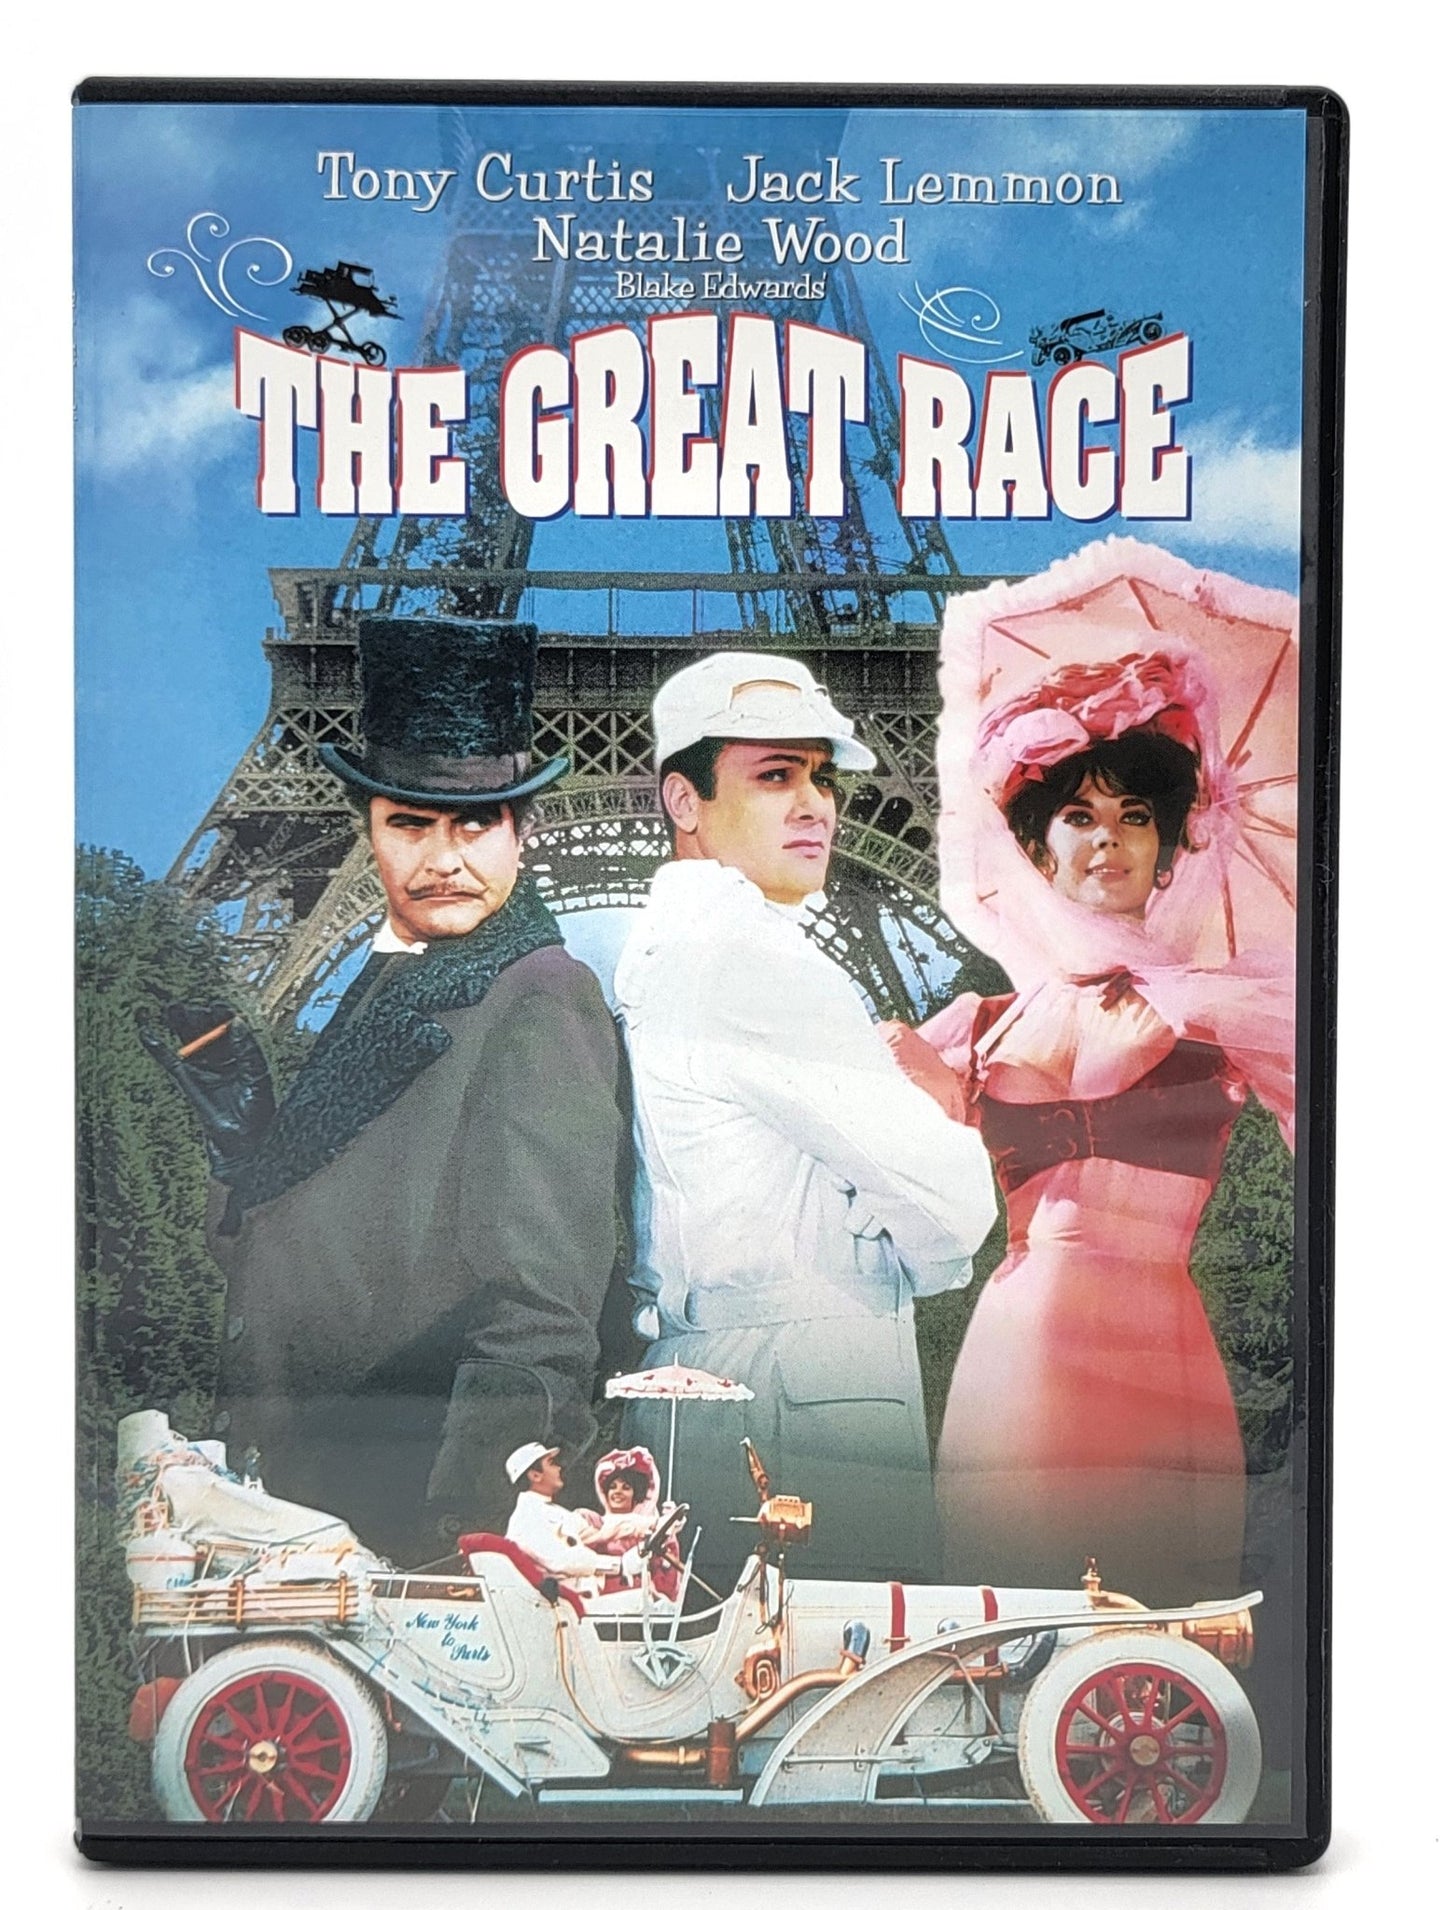 Warner Brothers - The Great Race | DVD | Widescreen - DVD - Steady Bunny Shop